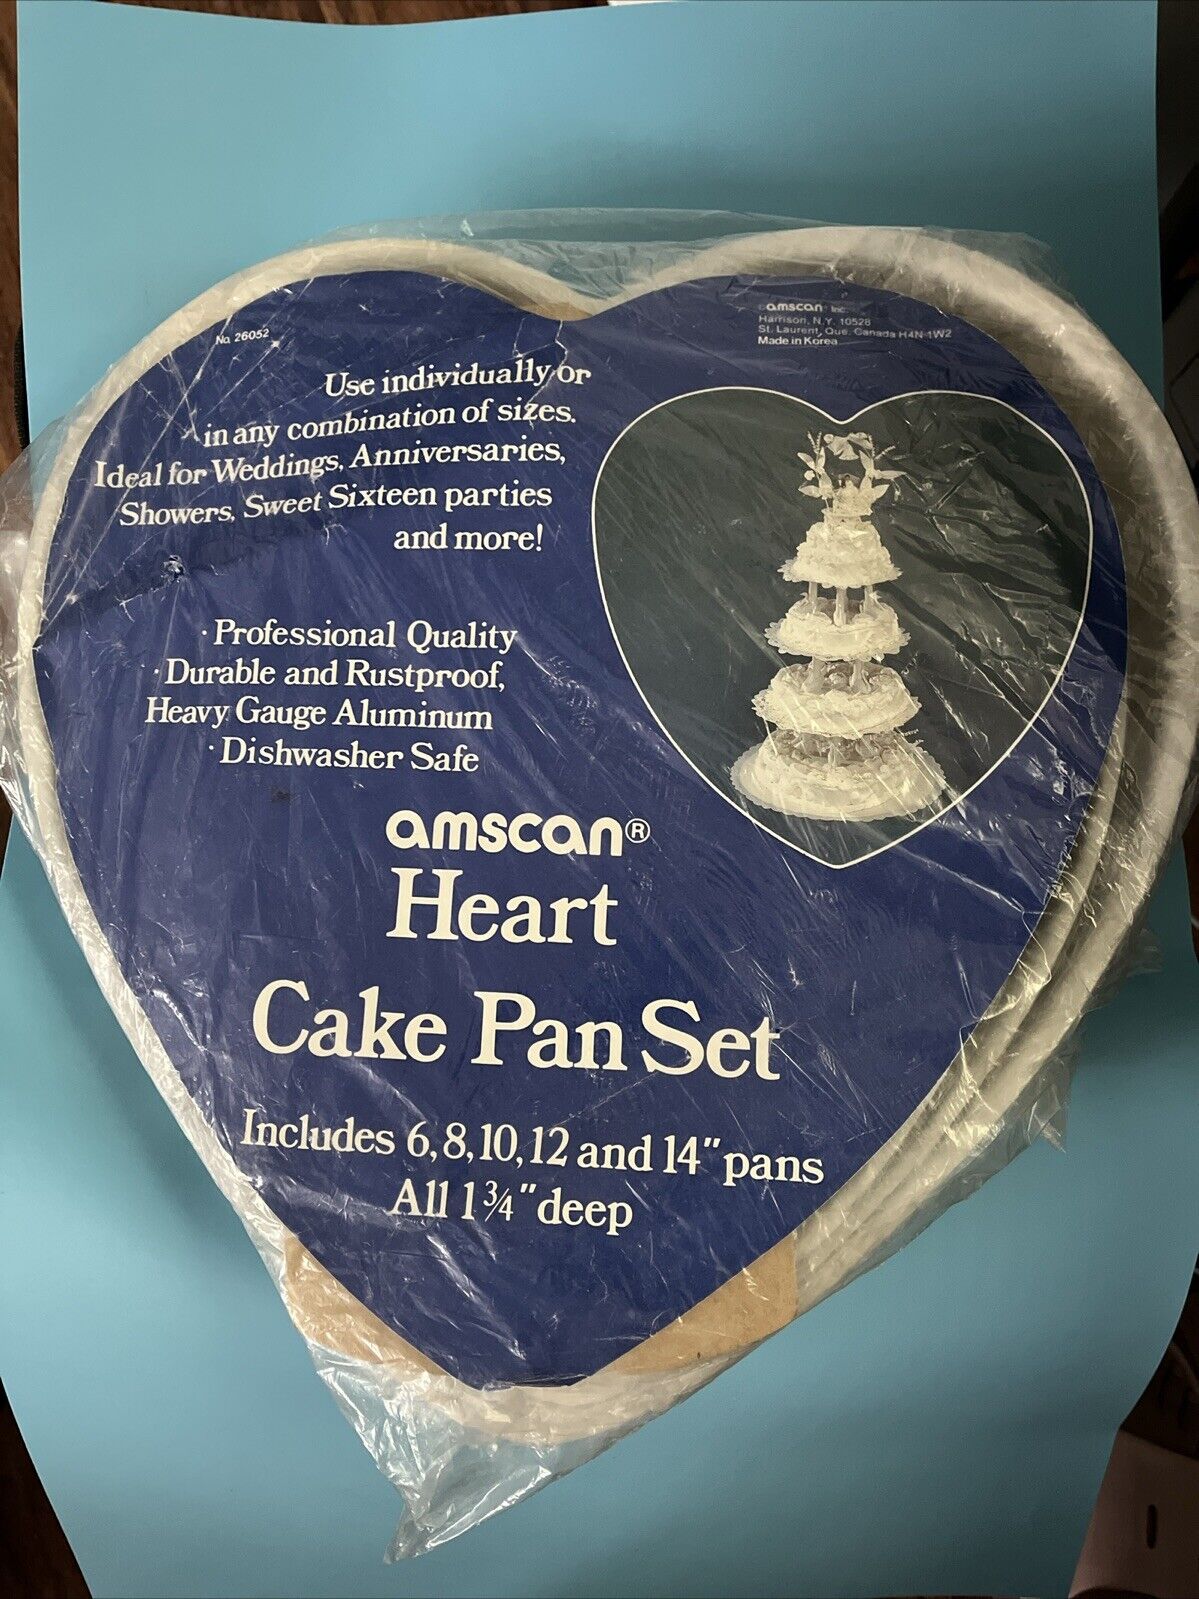 Vintage-Amscan Heart Cake Includes 6,8,10,12, And 14”Pans. All 1 3/4” Deep